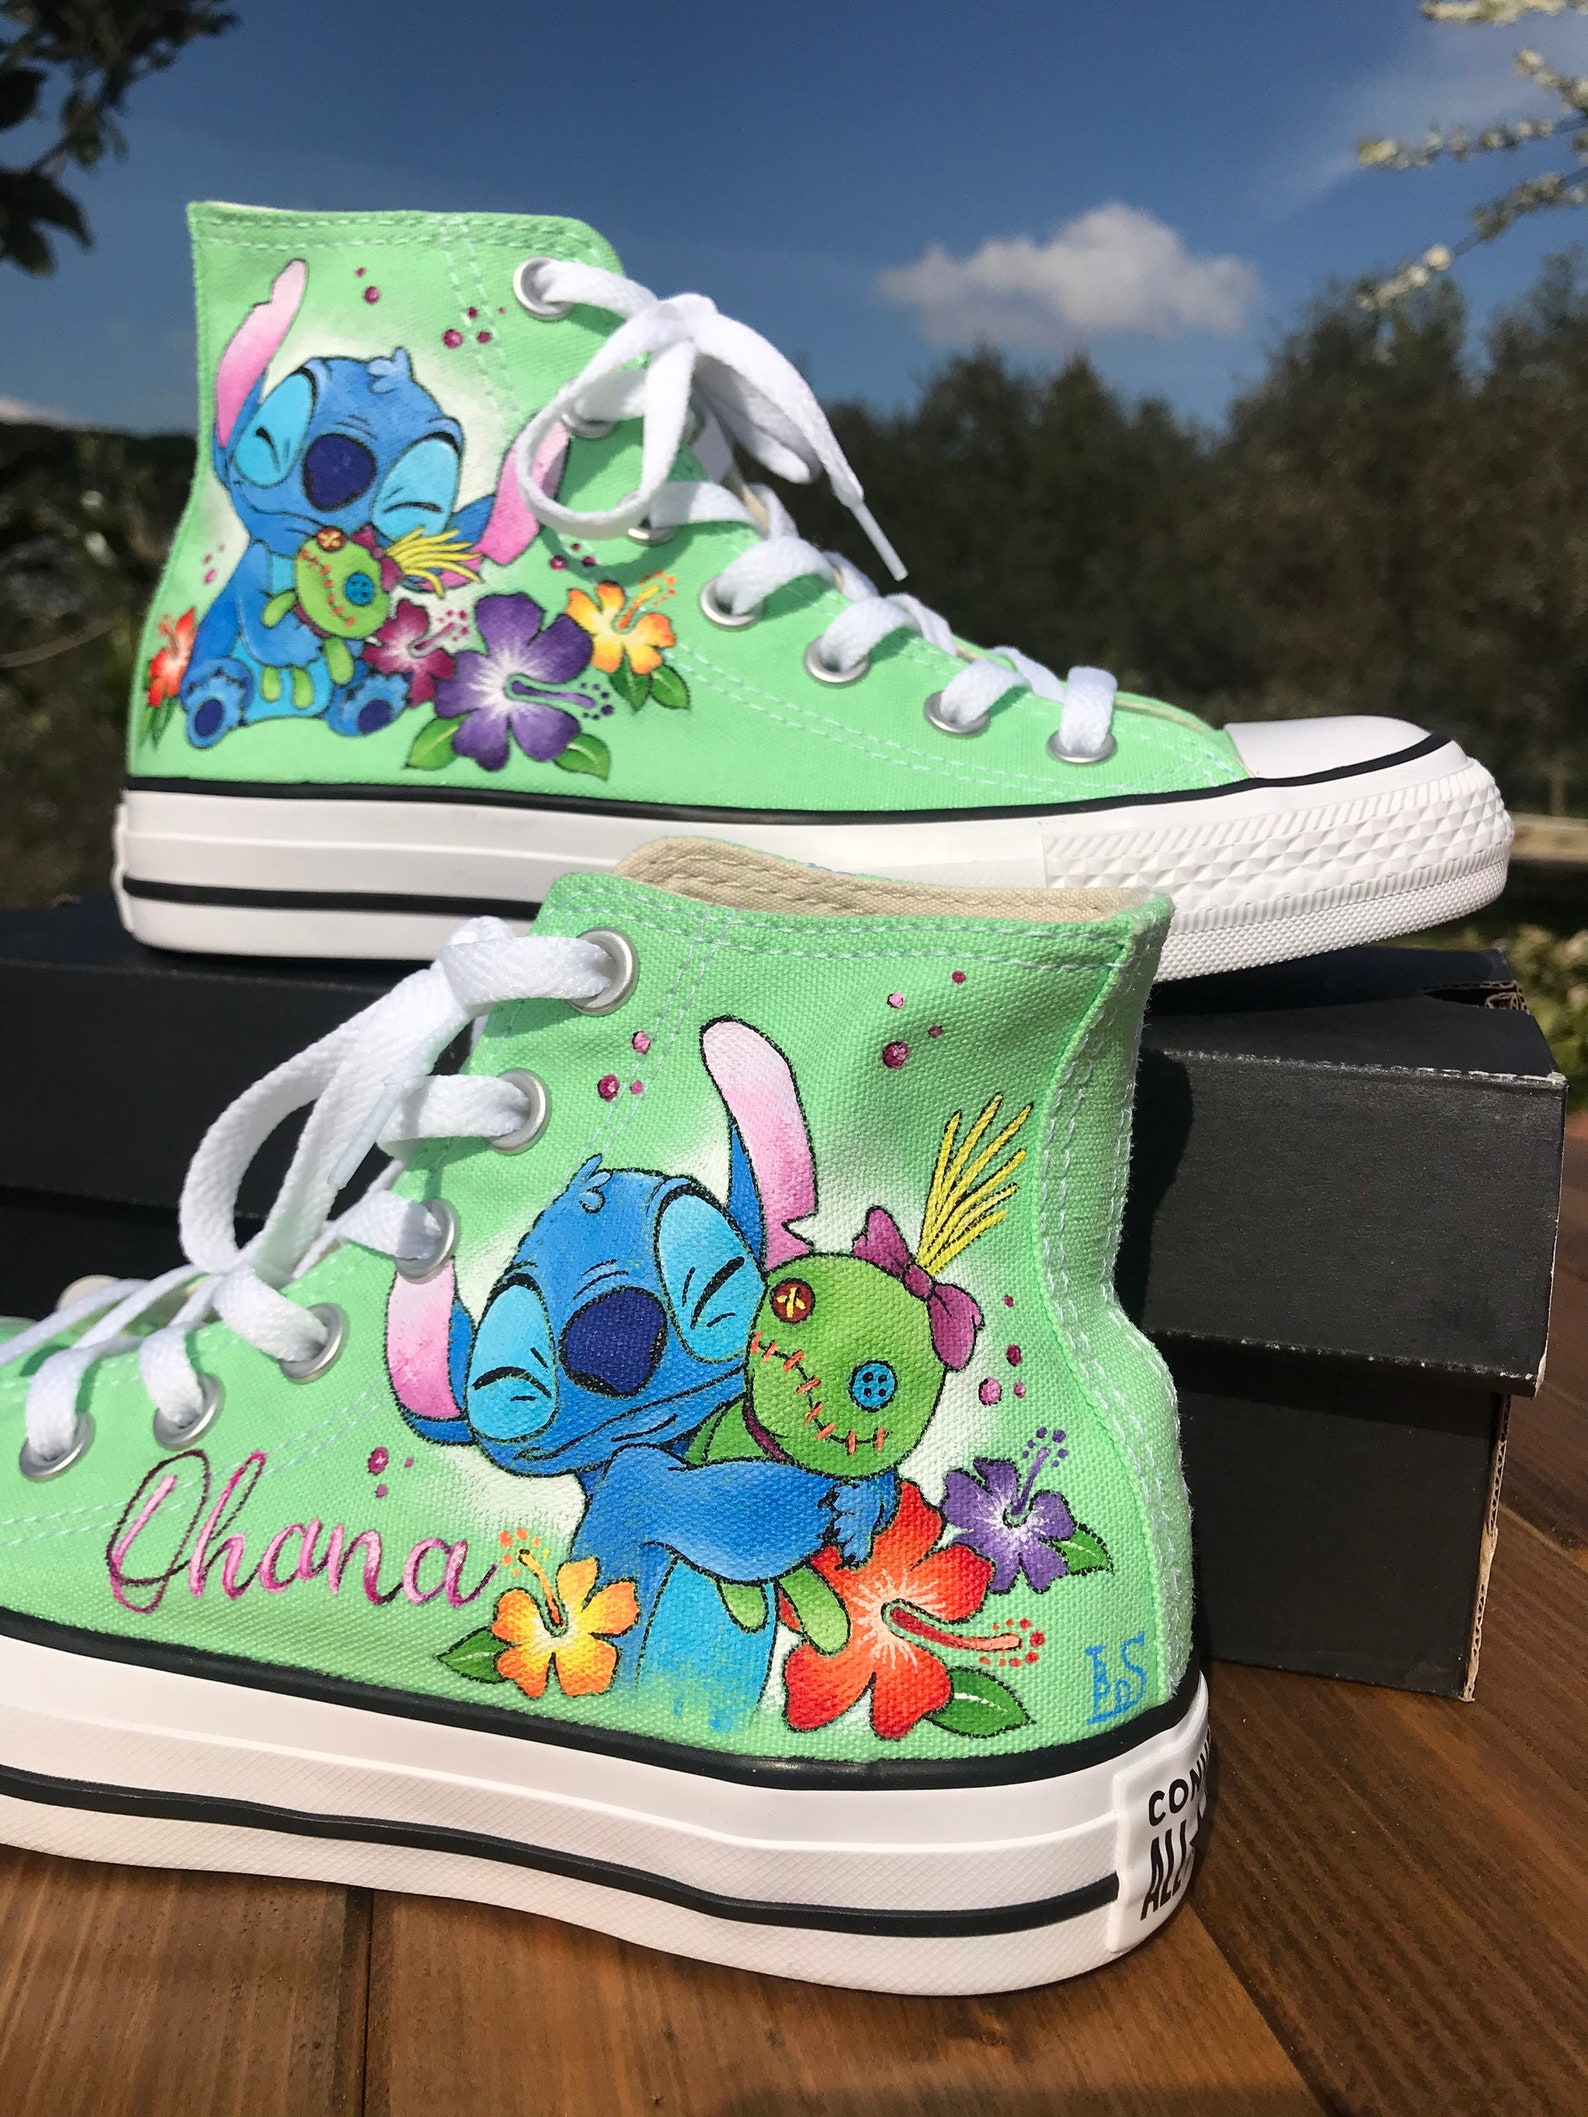 Hand-painted stitch Converse - Etsy